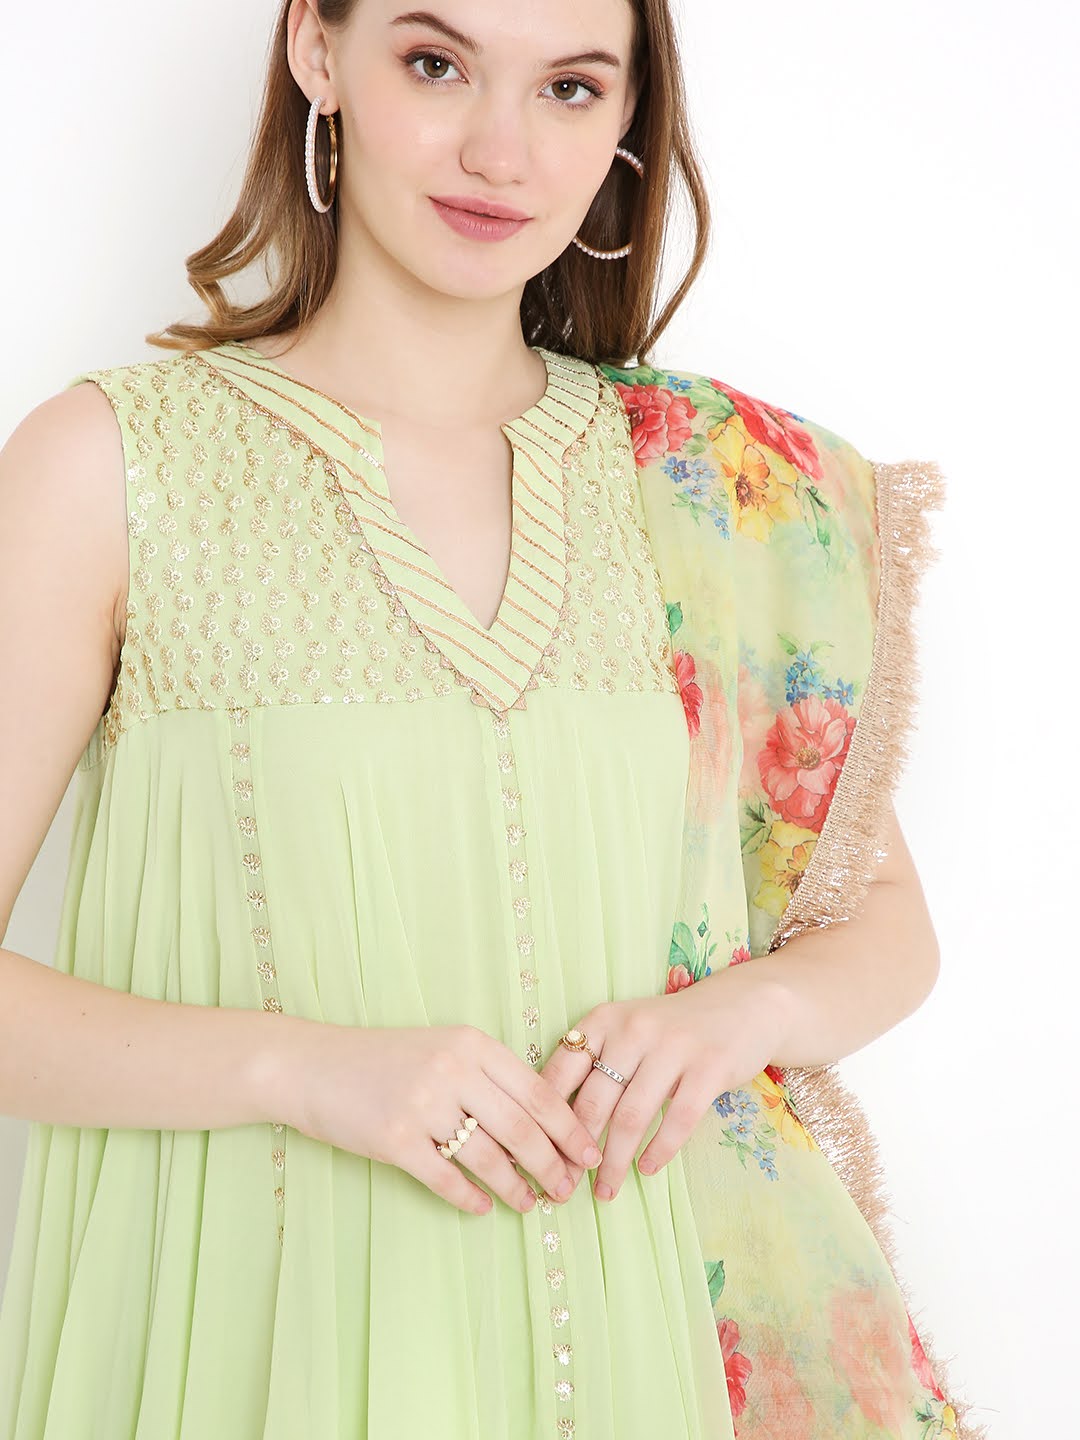 Top-Embroidered yoke with gota detailing on the neckline and flared bottom on the kurta - www.styletriggers.com